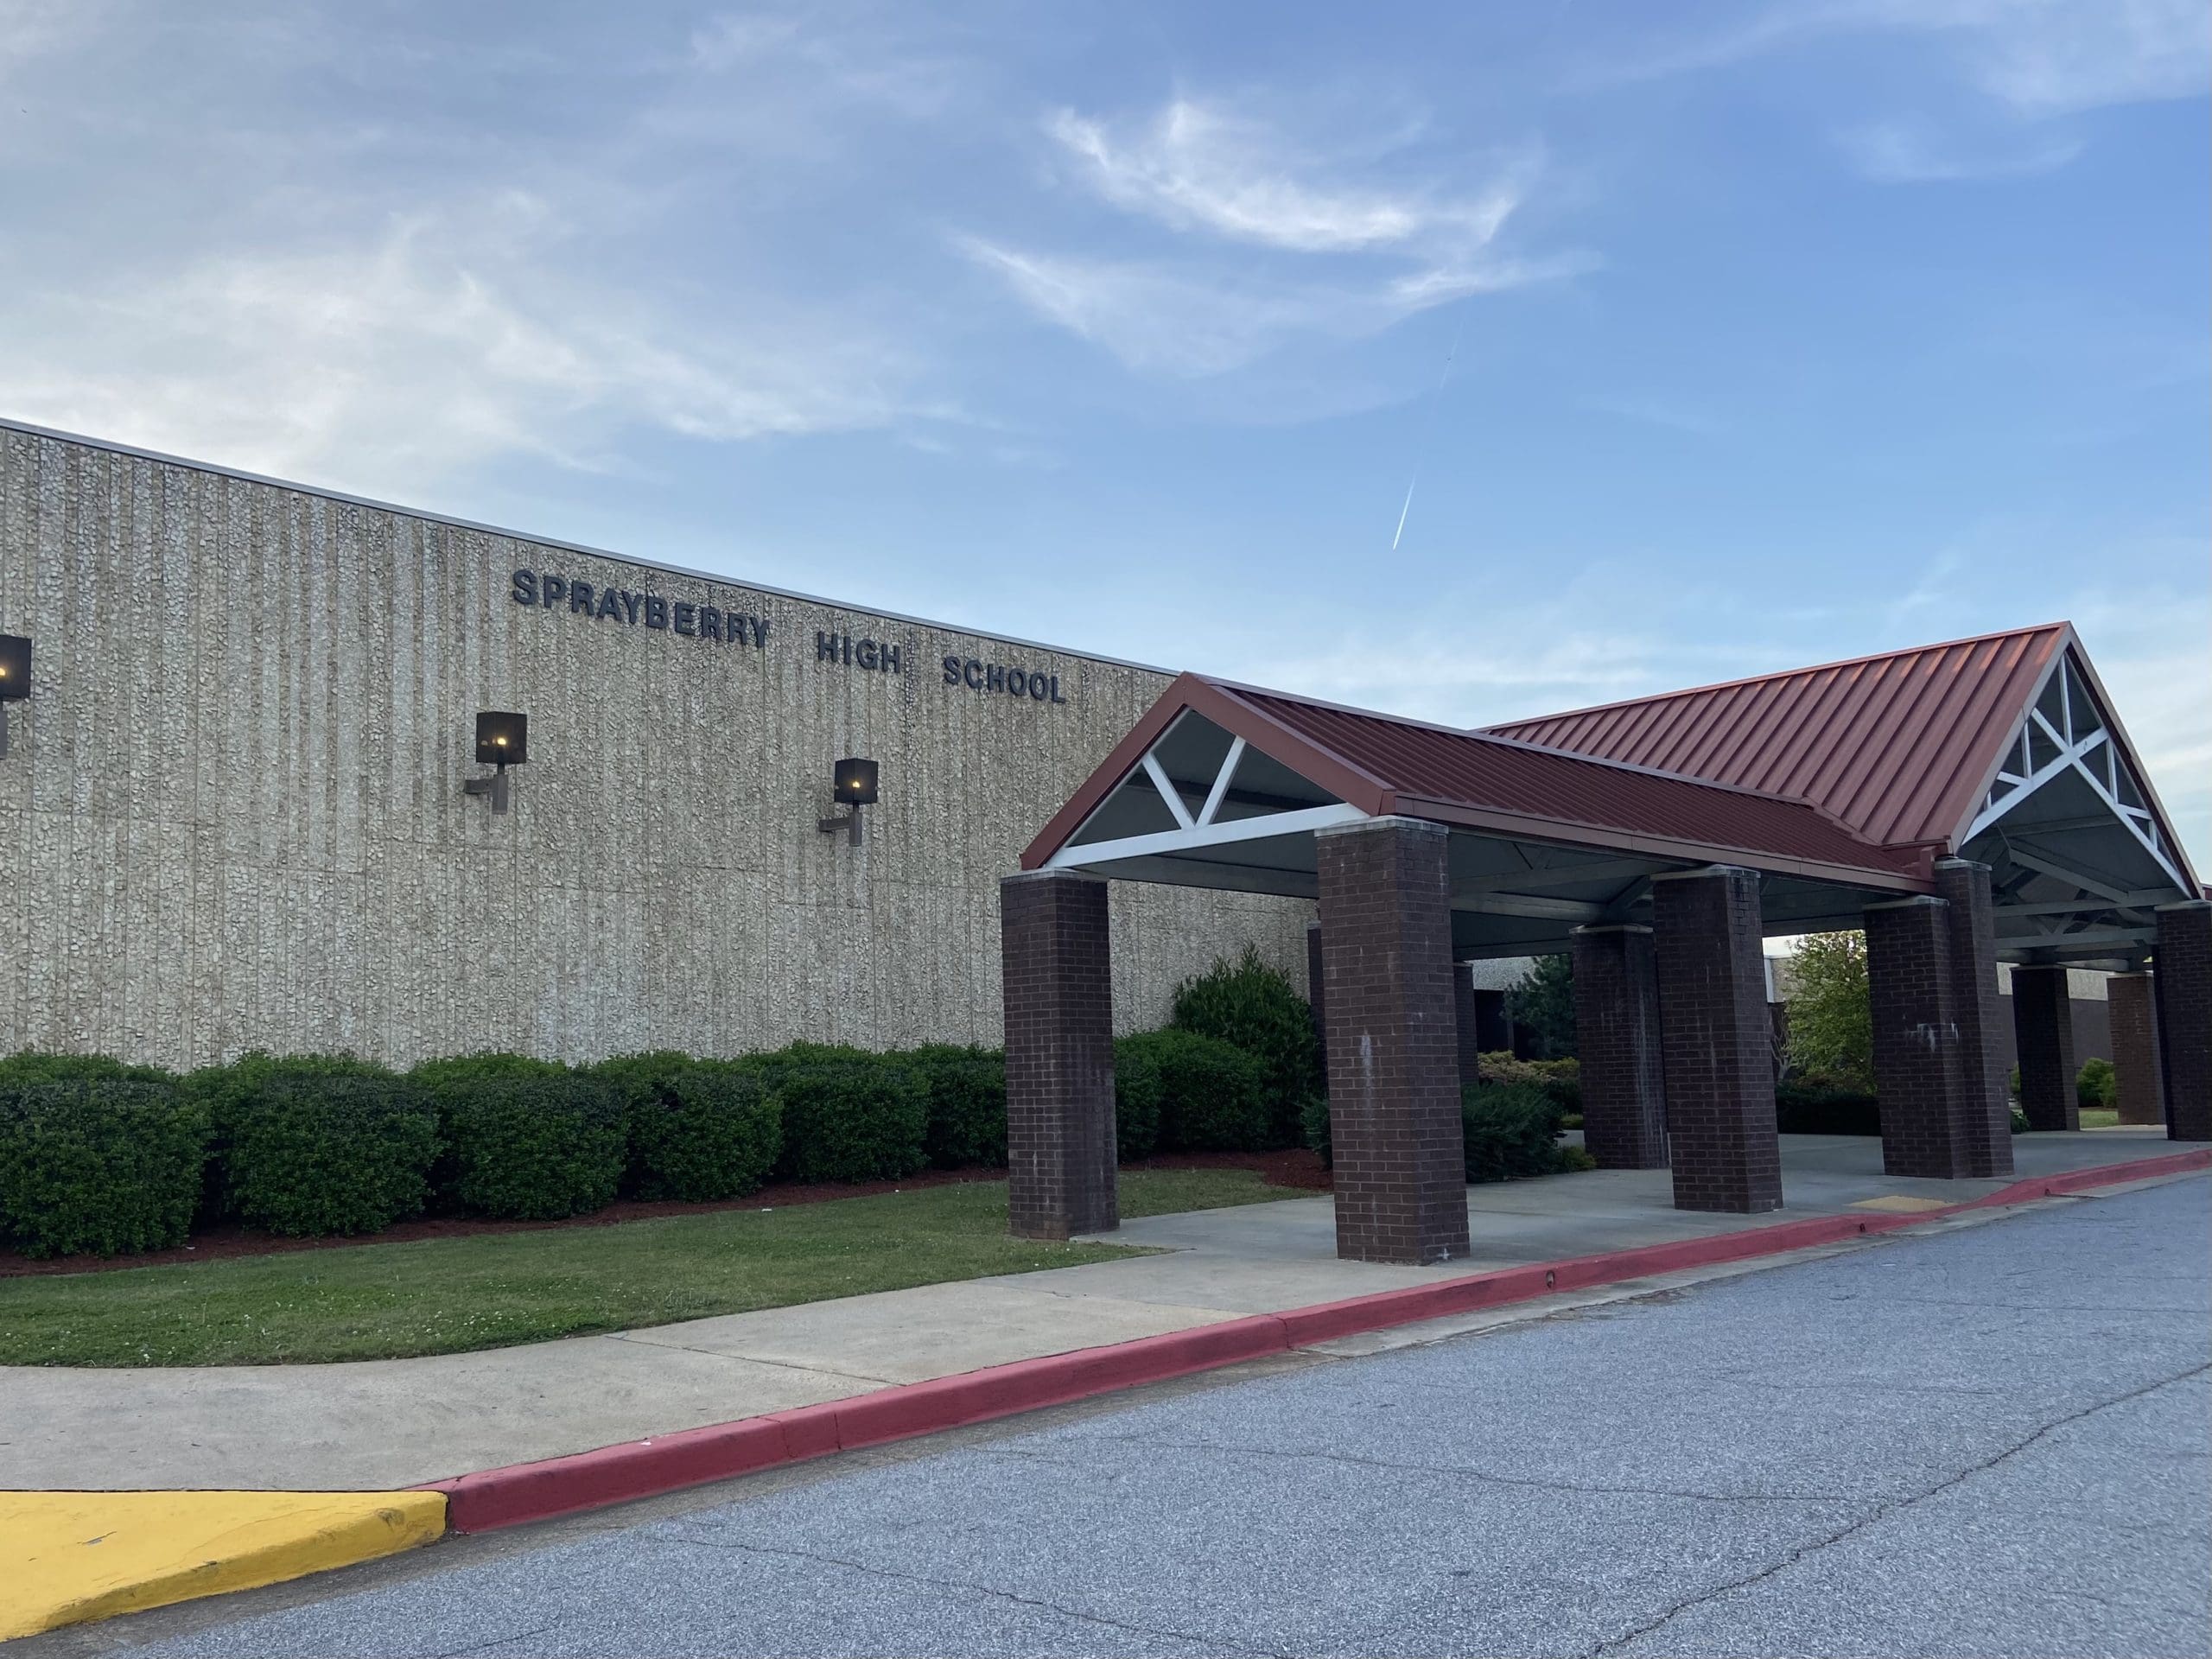 Community says it’s past time for Sprayberry High School rebuild Cobb